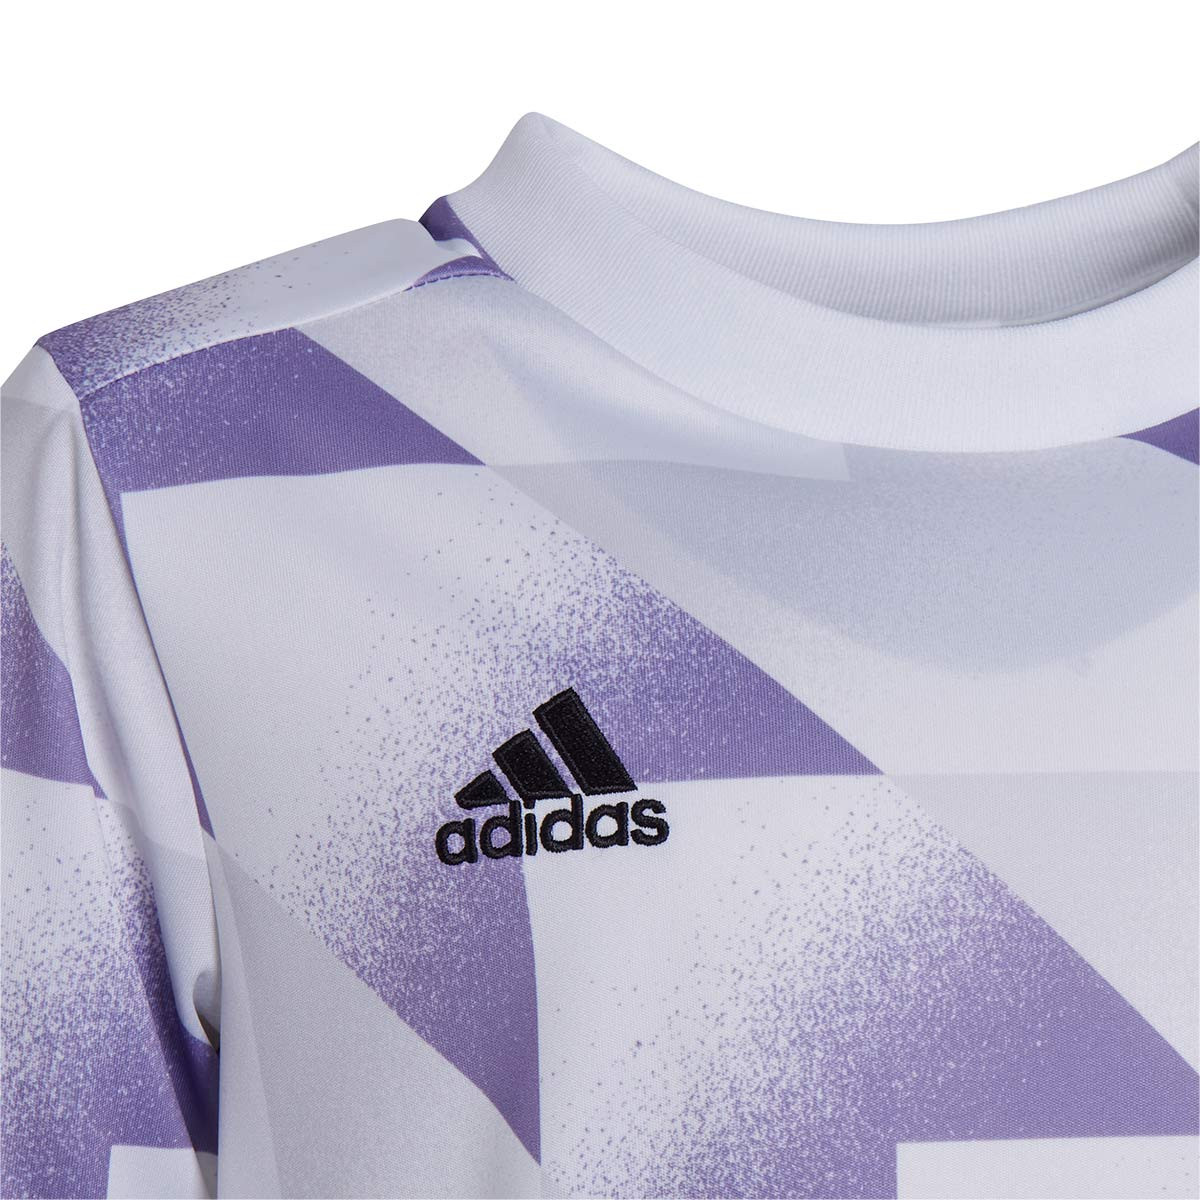 Adidas Real Madrid Pre-Match Jersey - White/Grey/Lilac - Size S